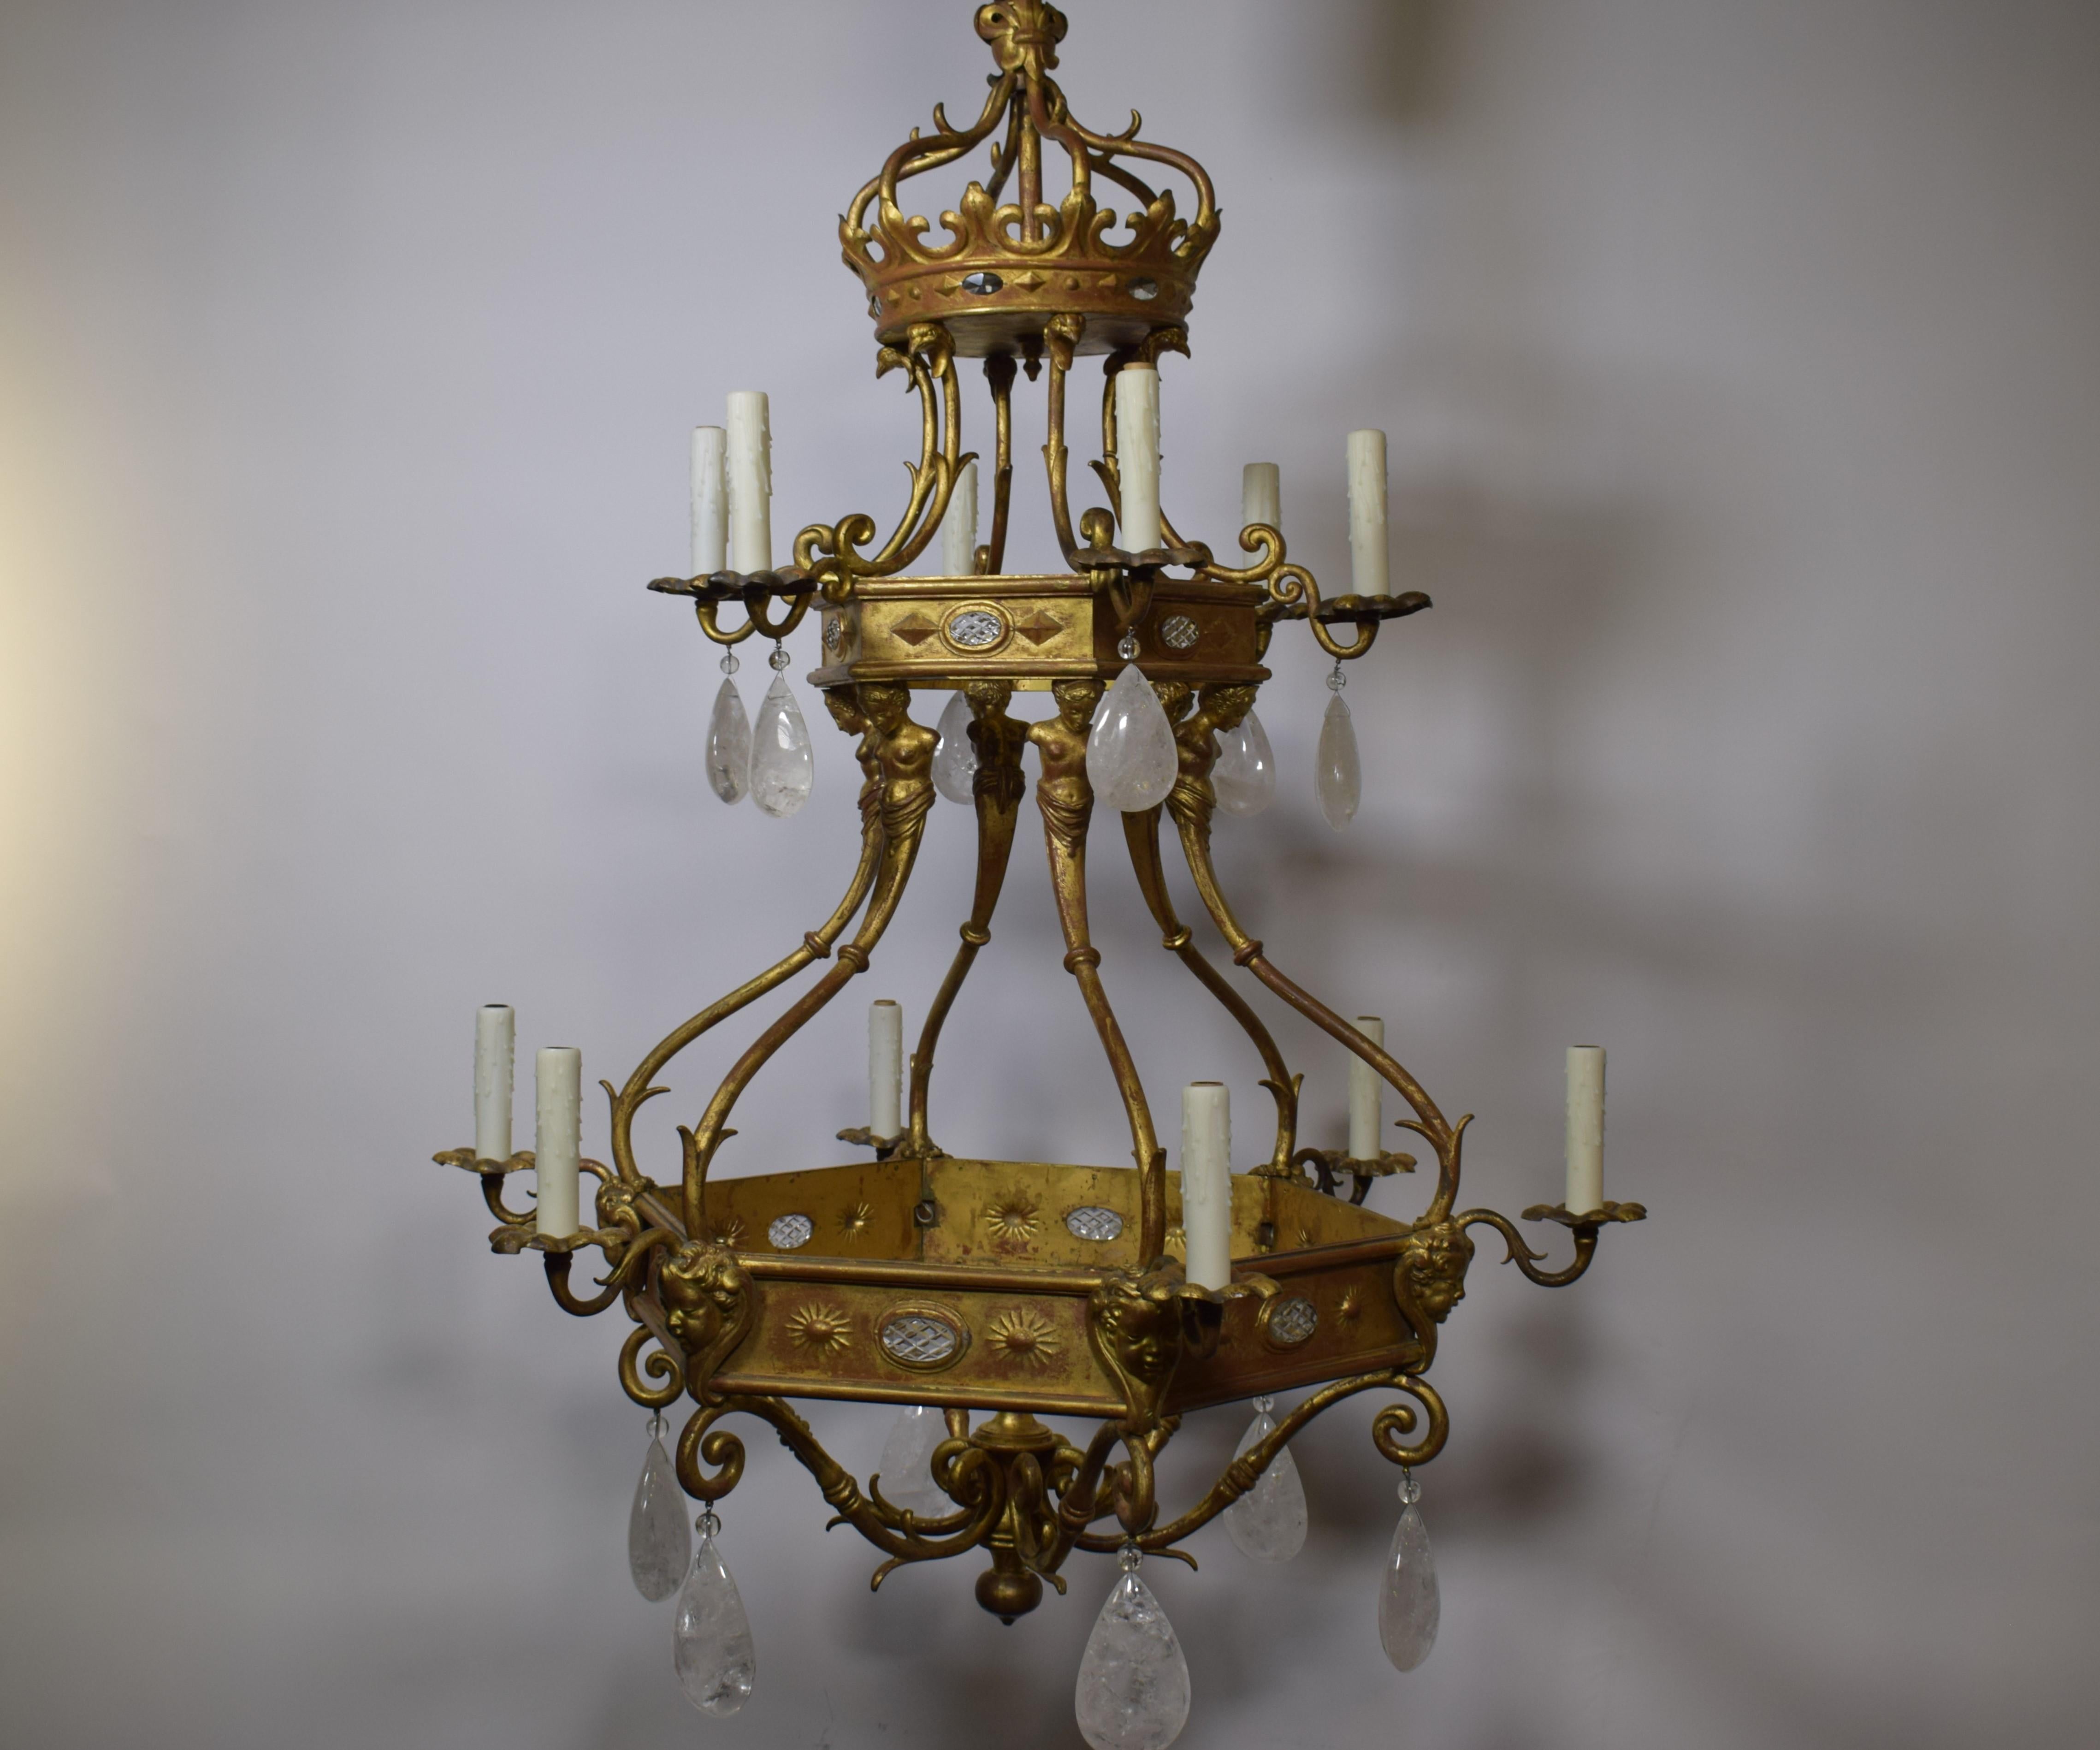 A very fine and unusual gilt bronze chandelier with rock crystal pendalogues. Two hexagons featuring oval crystal reserves issuing six arms each in a row on two levels. Stylized crown top.
France, circa 1900
Dimensions: Height 51